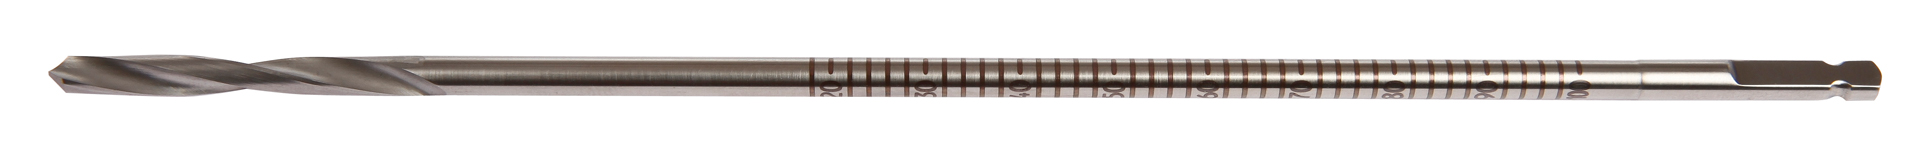 Image of a laser-marked twist drill bit for medical use, marked by KKS.